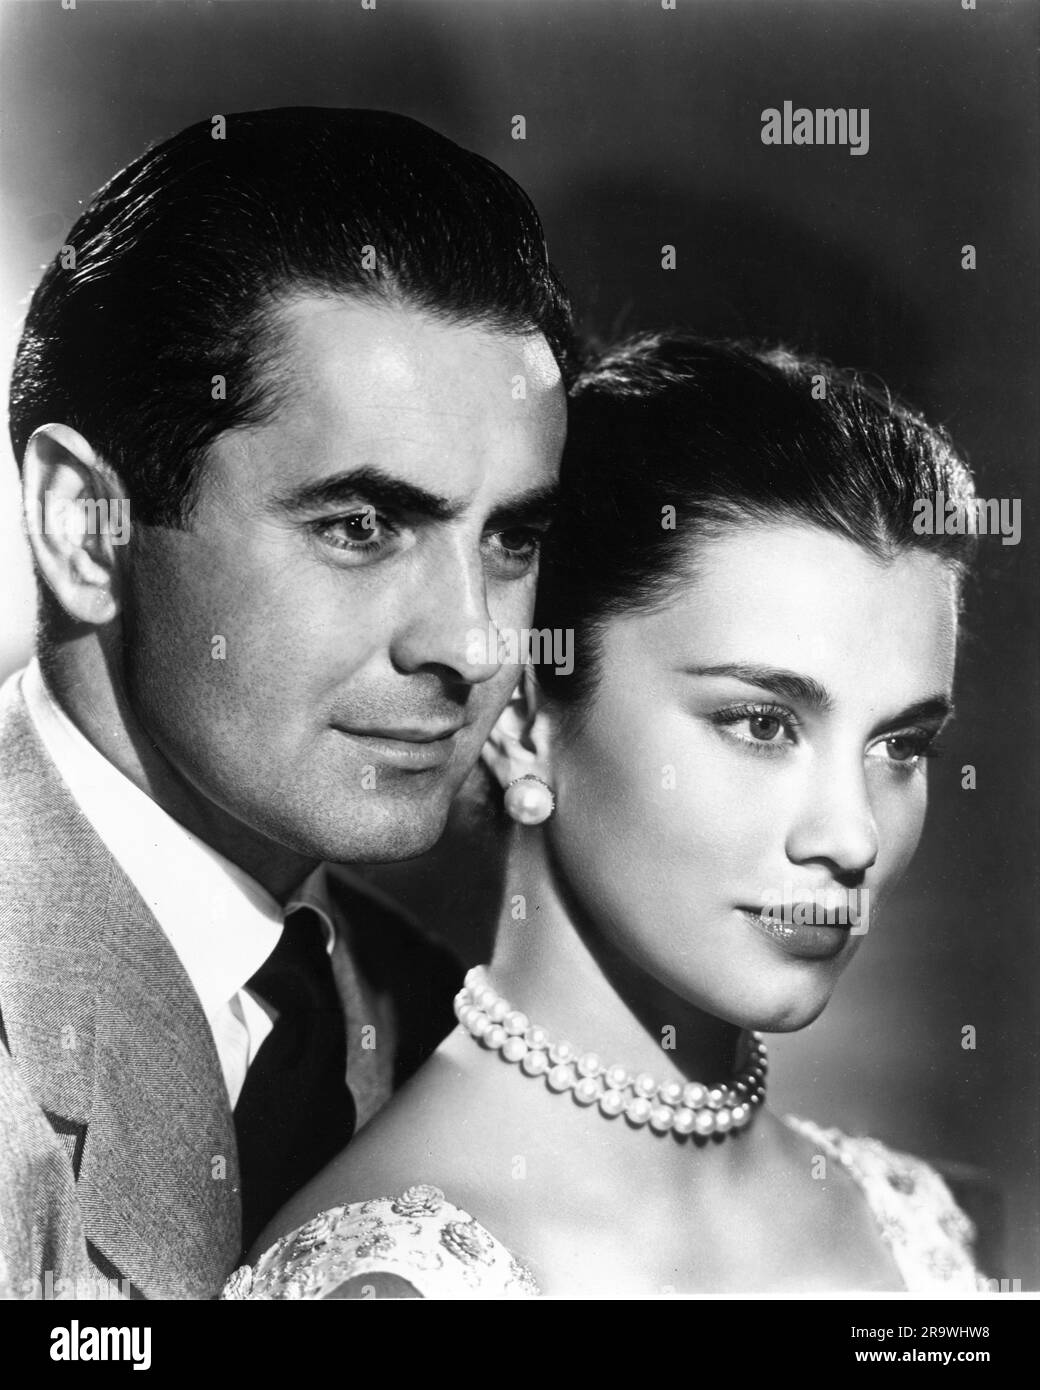 Hollywood heartthrob Black and White Stock Photos & Images - Alamy